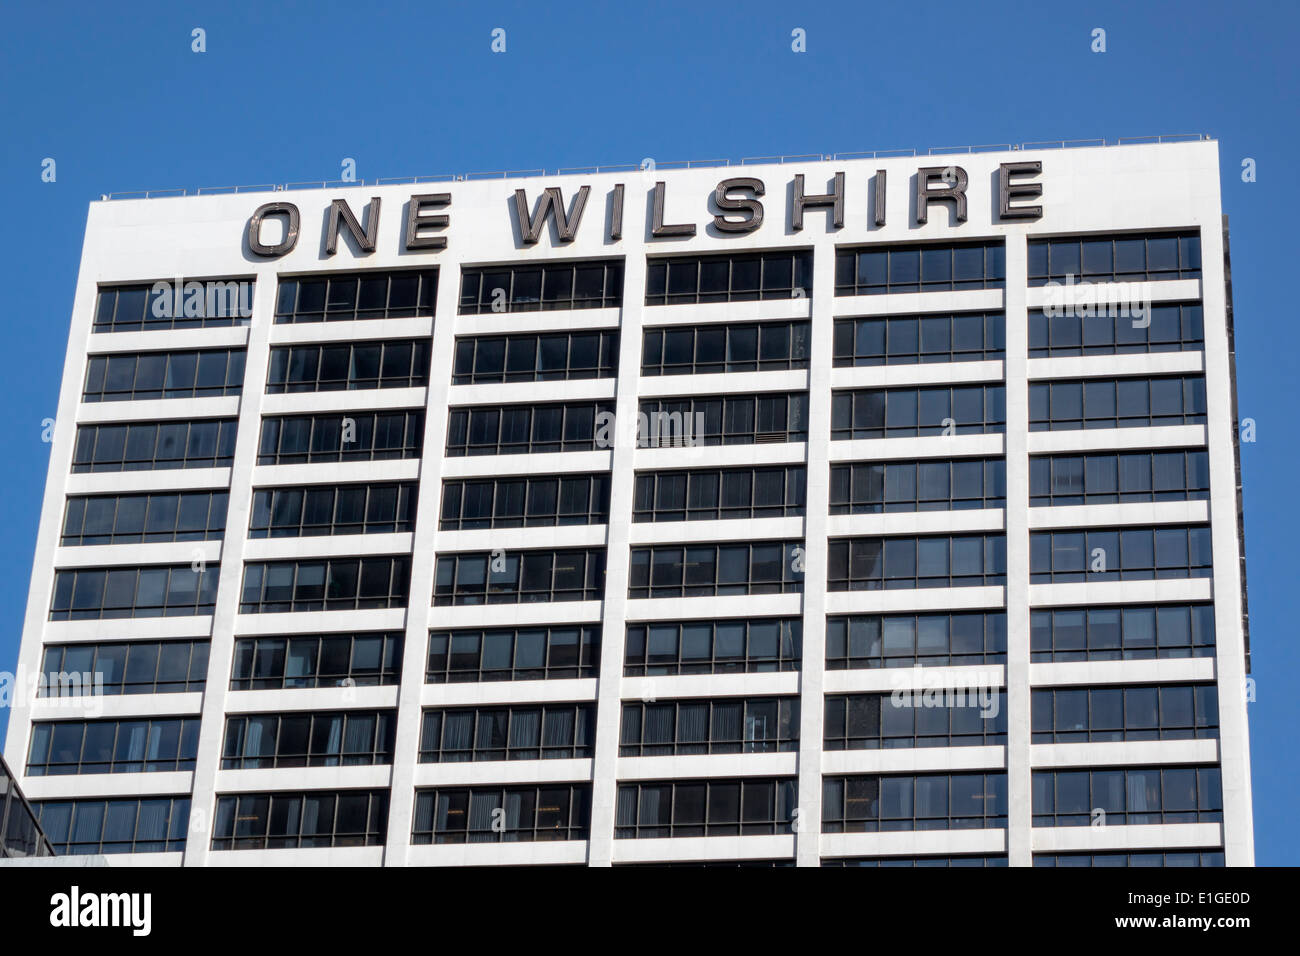 Los Angeles California,Financial District,One Wilshire building,skyscraper,office building,sign,signs,modern,architecture Skidmore,Owings,glass,window Stock Photo